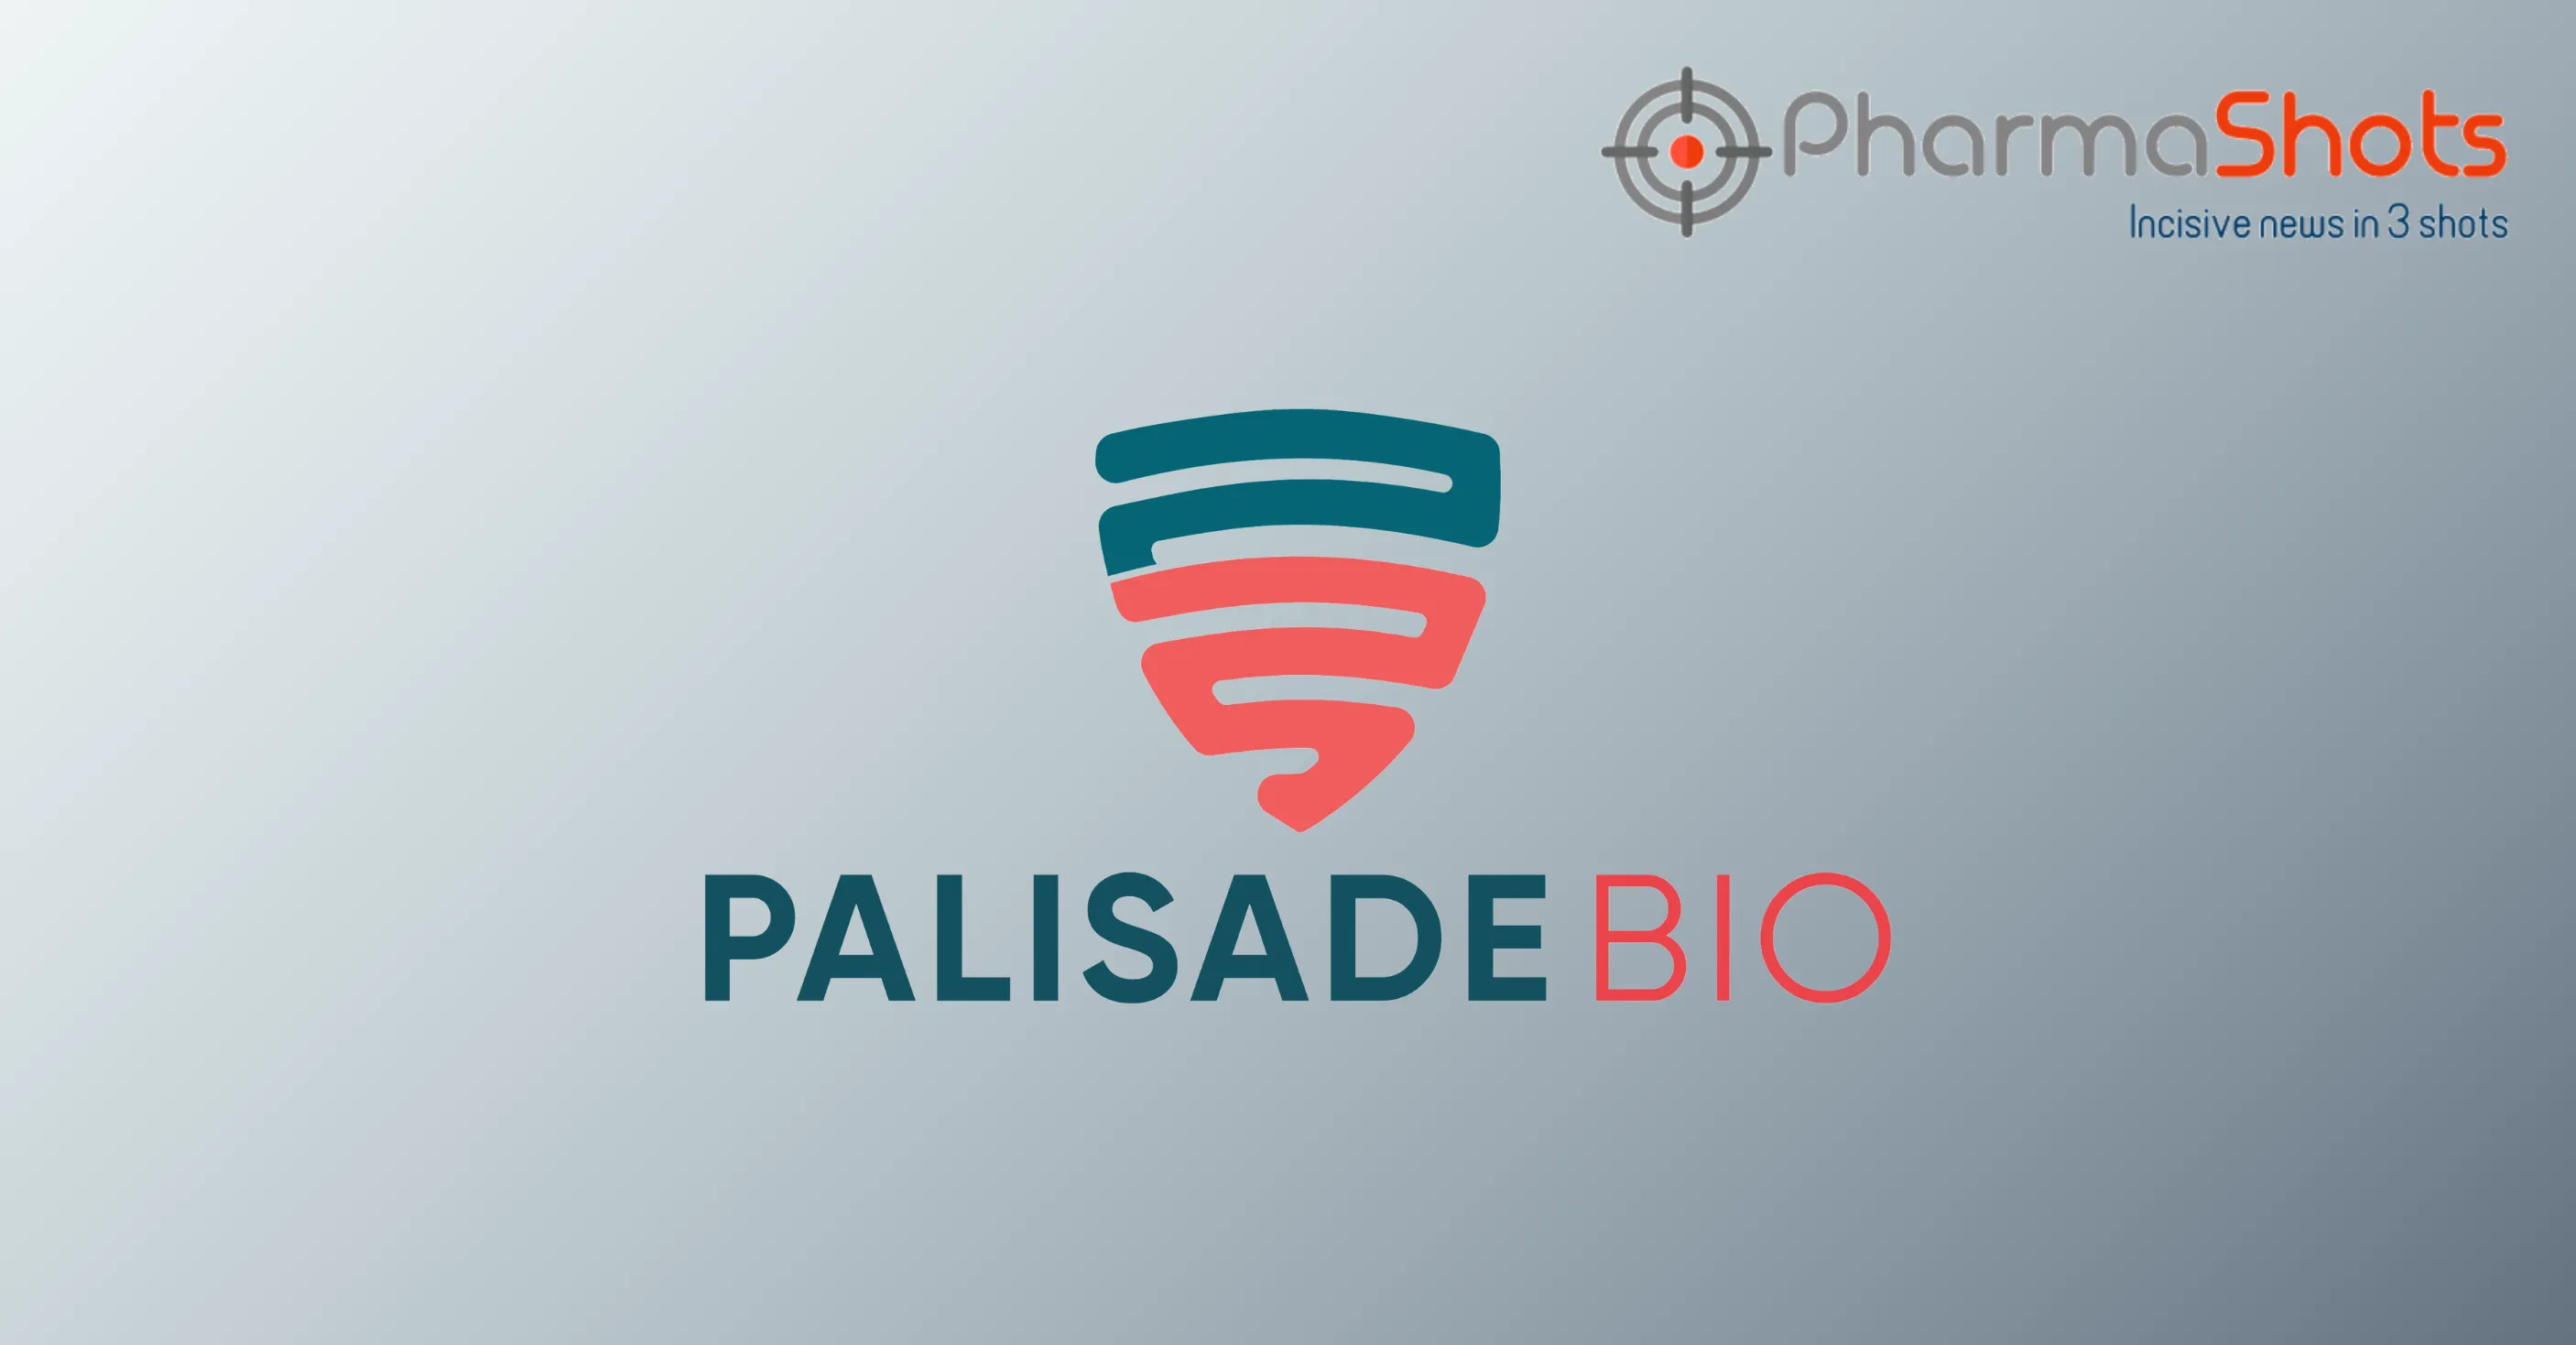 The Canadian Intellectual Property Office (CIPO) Issues Notice of Allowance for Patent Covering Palisade Bio’s PALI-2108 for Treating Ulcerative Colitis